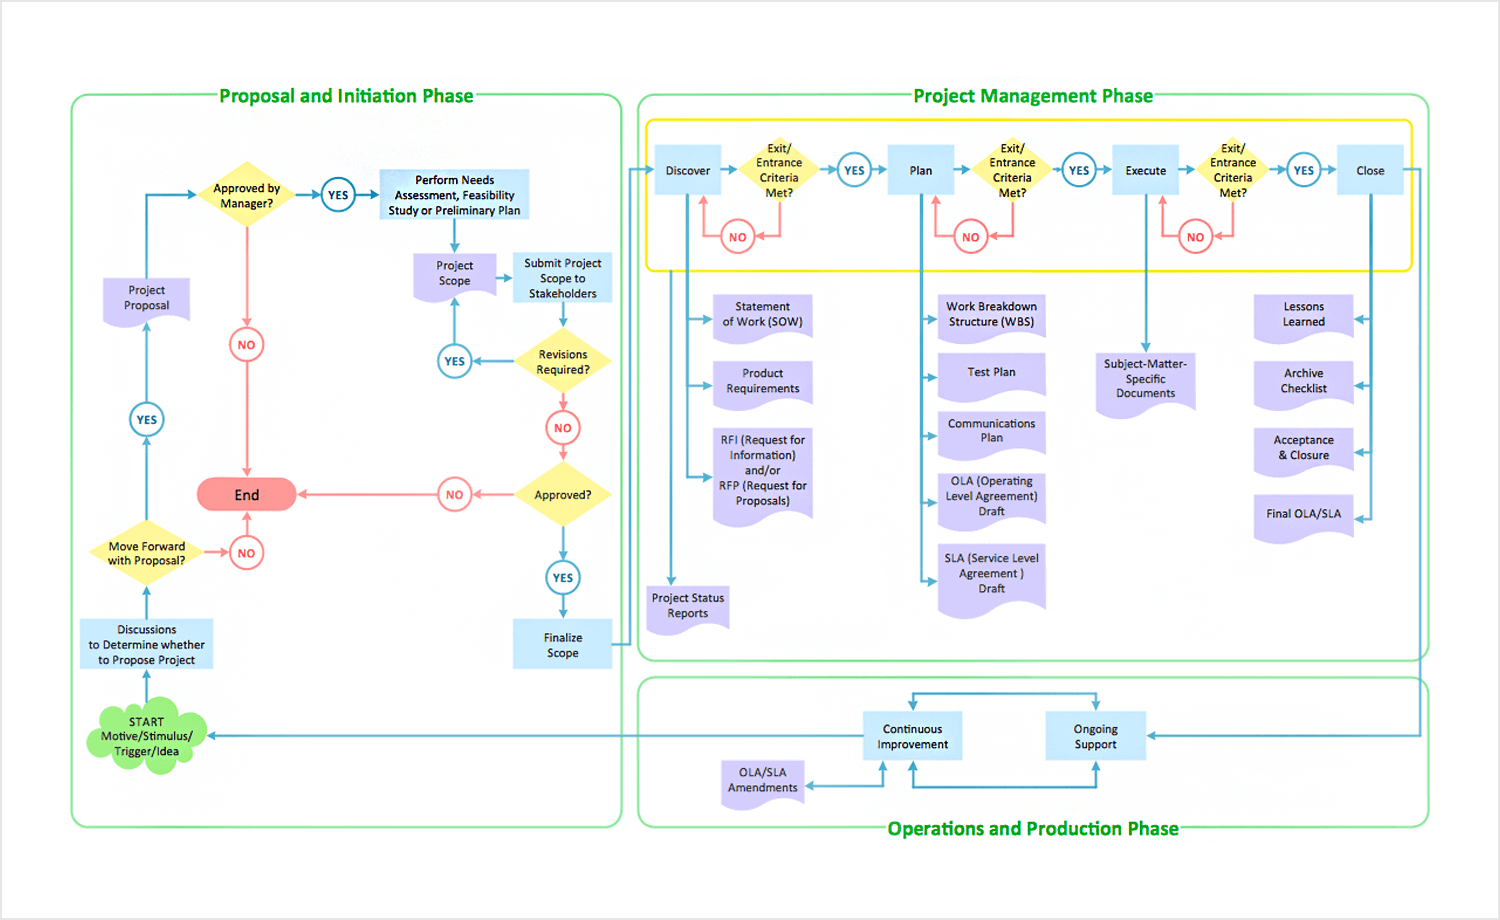 Flowchart created using ConceptDraw illustrating a detailed process flow involving Customer, Sales, Management, and Credit Department stages